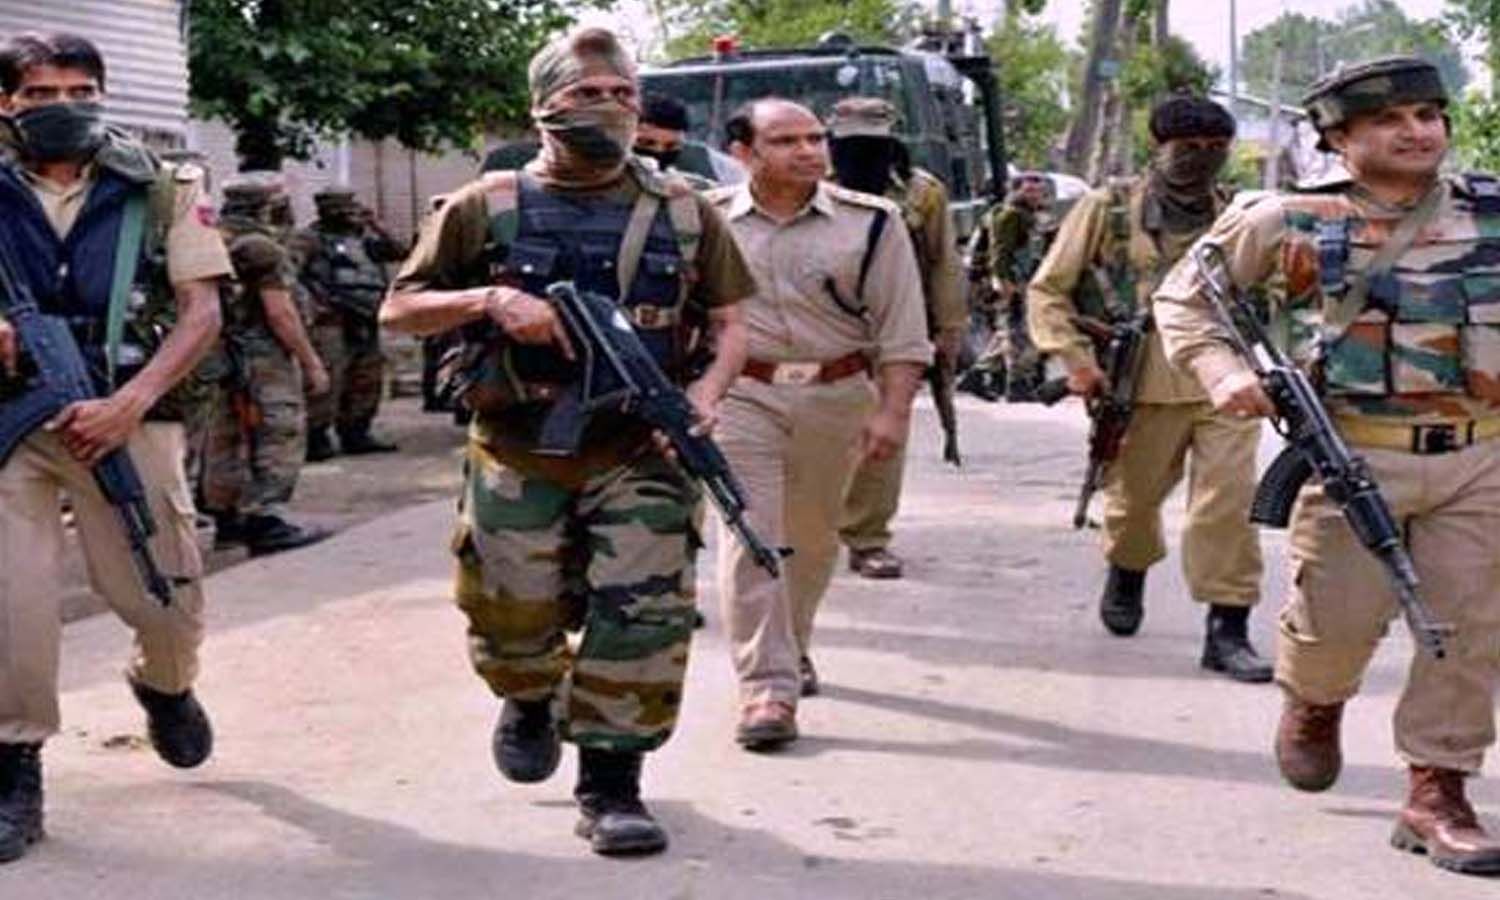 Jammu & Kashmir Encounter: Two terrorists killed in encounter with security forces in Kupwara, many weapons recovered